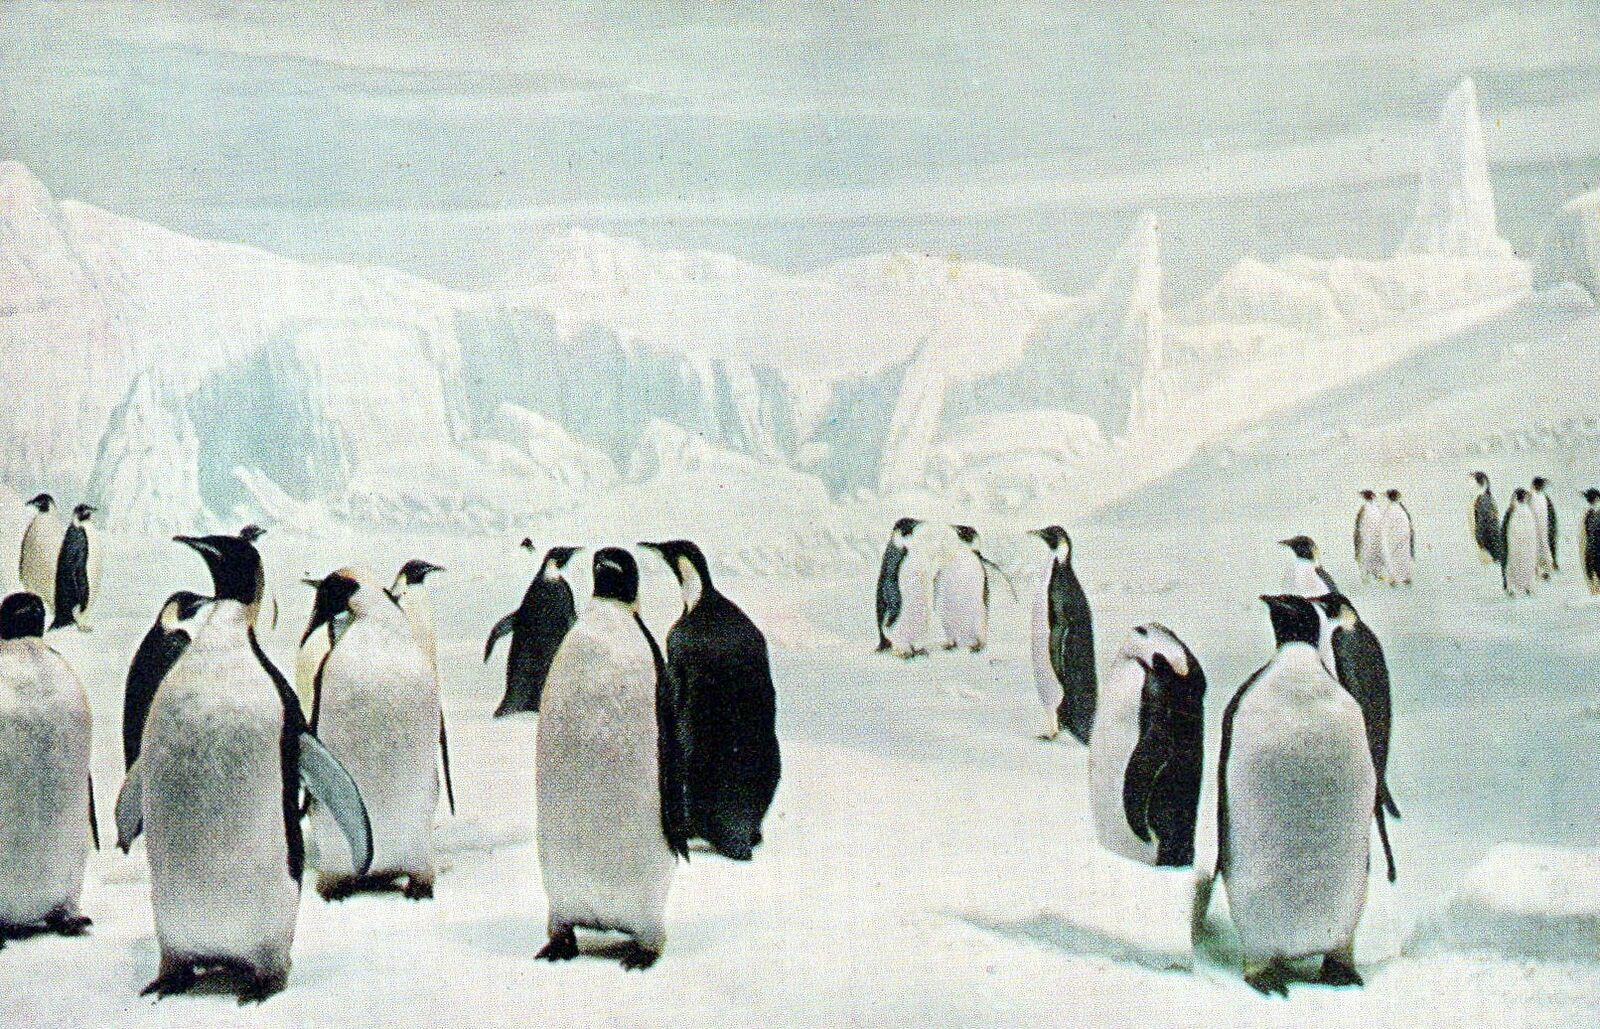 VINTAGE POSTCARD GROUP OF EMPEROR PENGUINS EXHIBIT AT NATURAL HISTORY MUSEUM